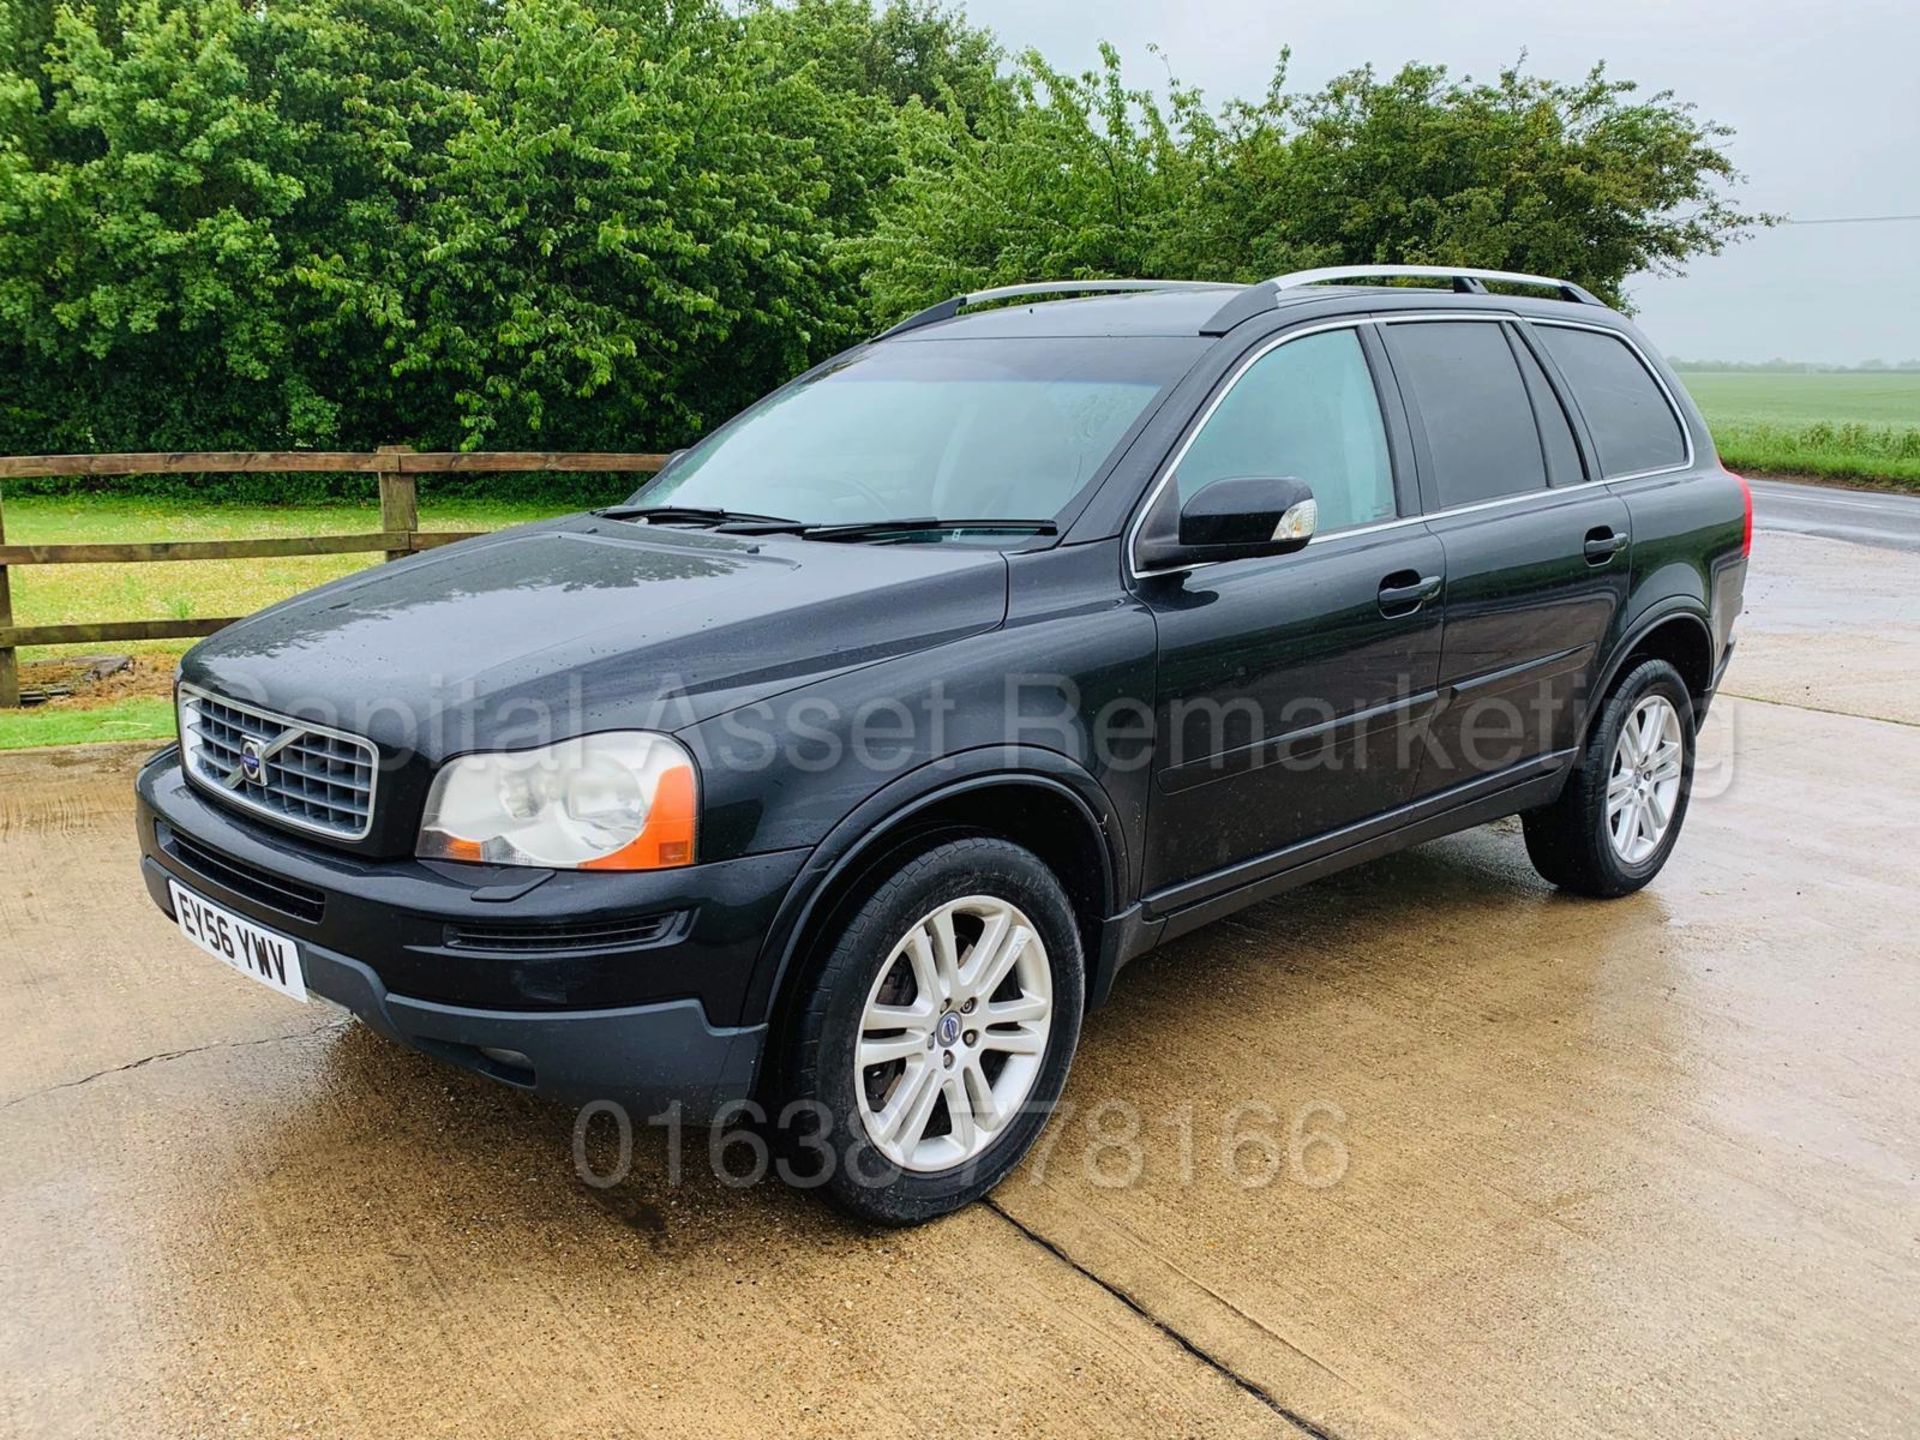 VOLVO XC90 *SE LUX - EDITION* 7 SEATER SUV (2007 MODEL) '2.4 DIESEL - 185 BHP - AUTO' *FULLY LOADED* - Image 4 of 37